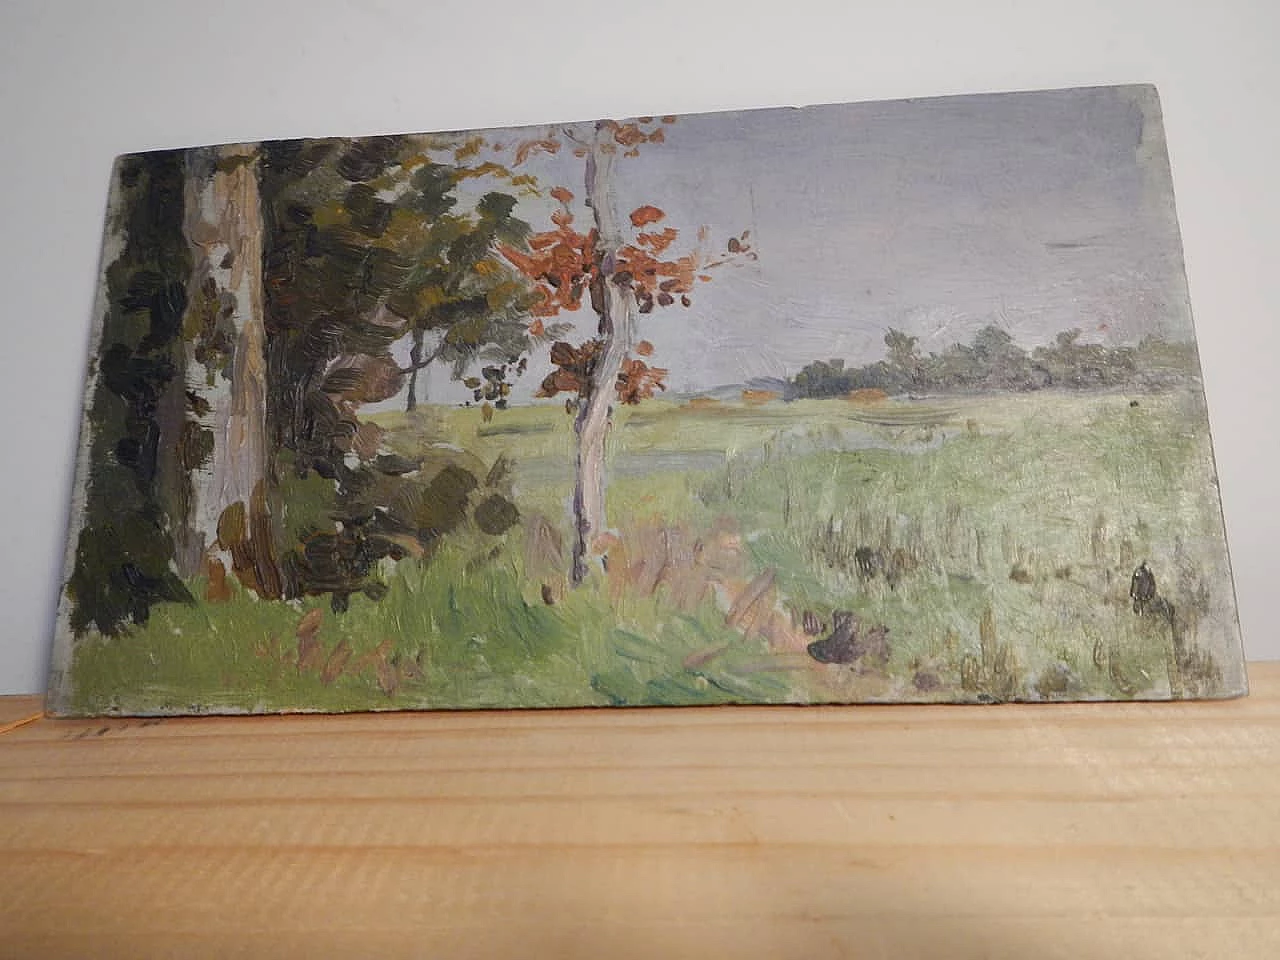 Des Champs, countryside landscape, painting on wood, early 20th century 12